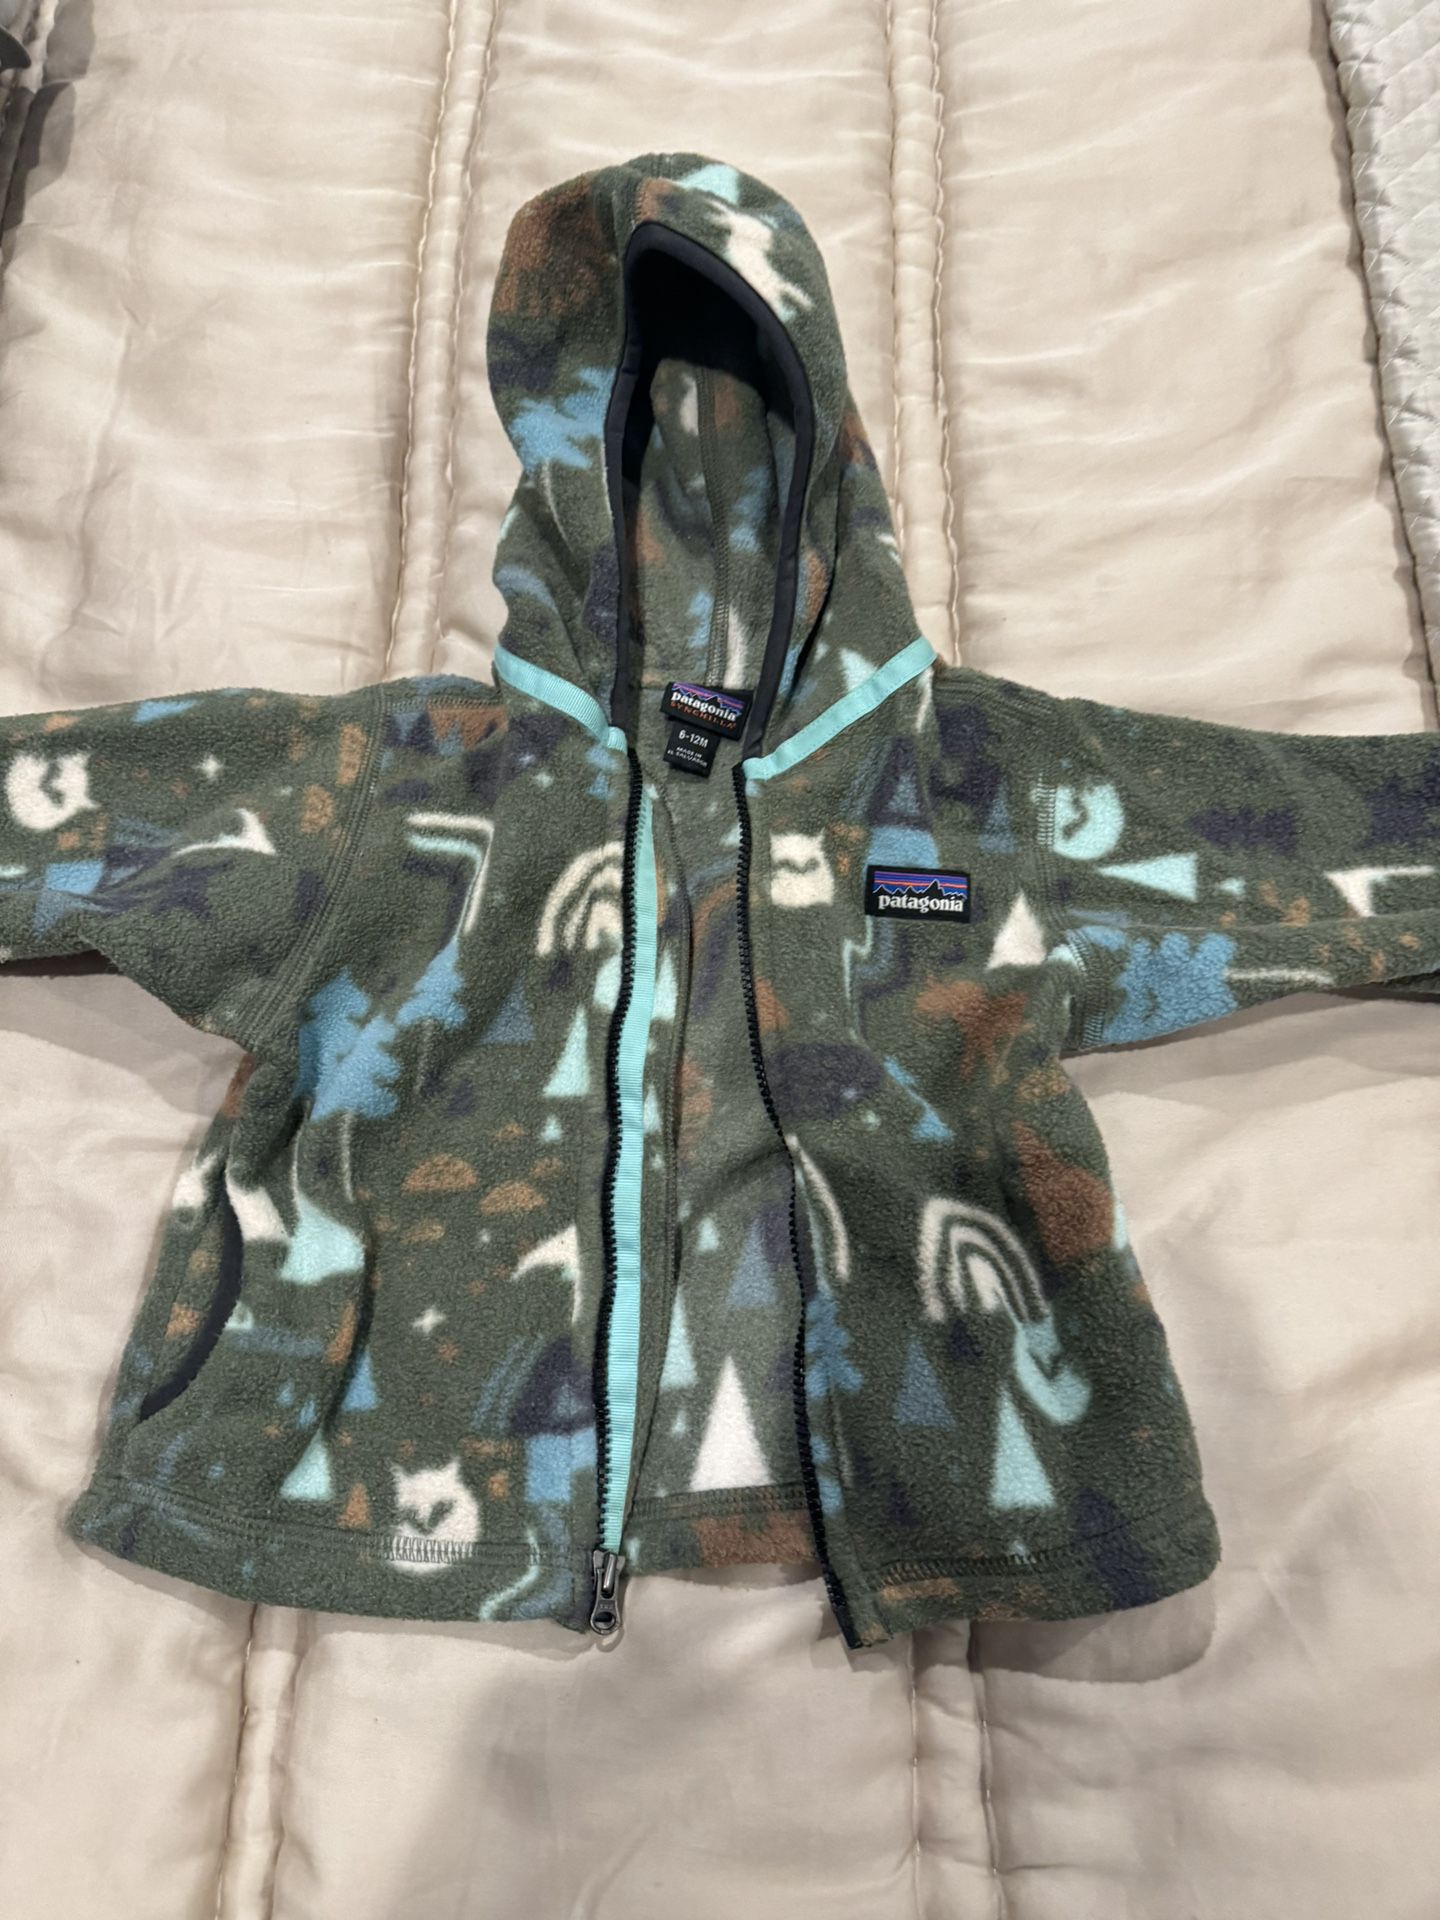 Two barely worn Patagonia baby jackets